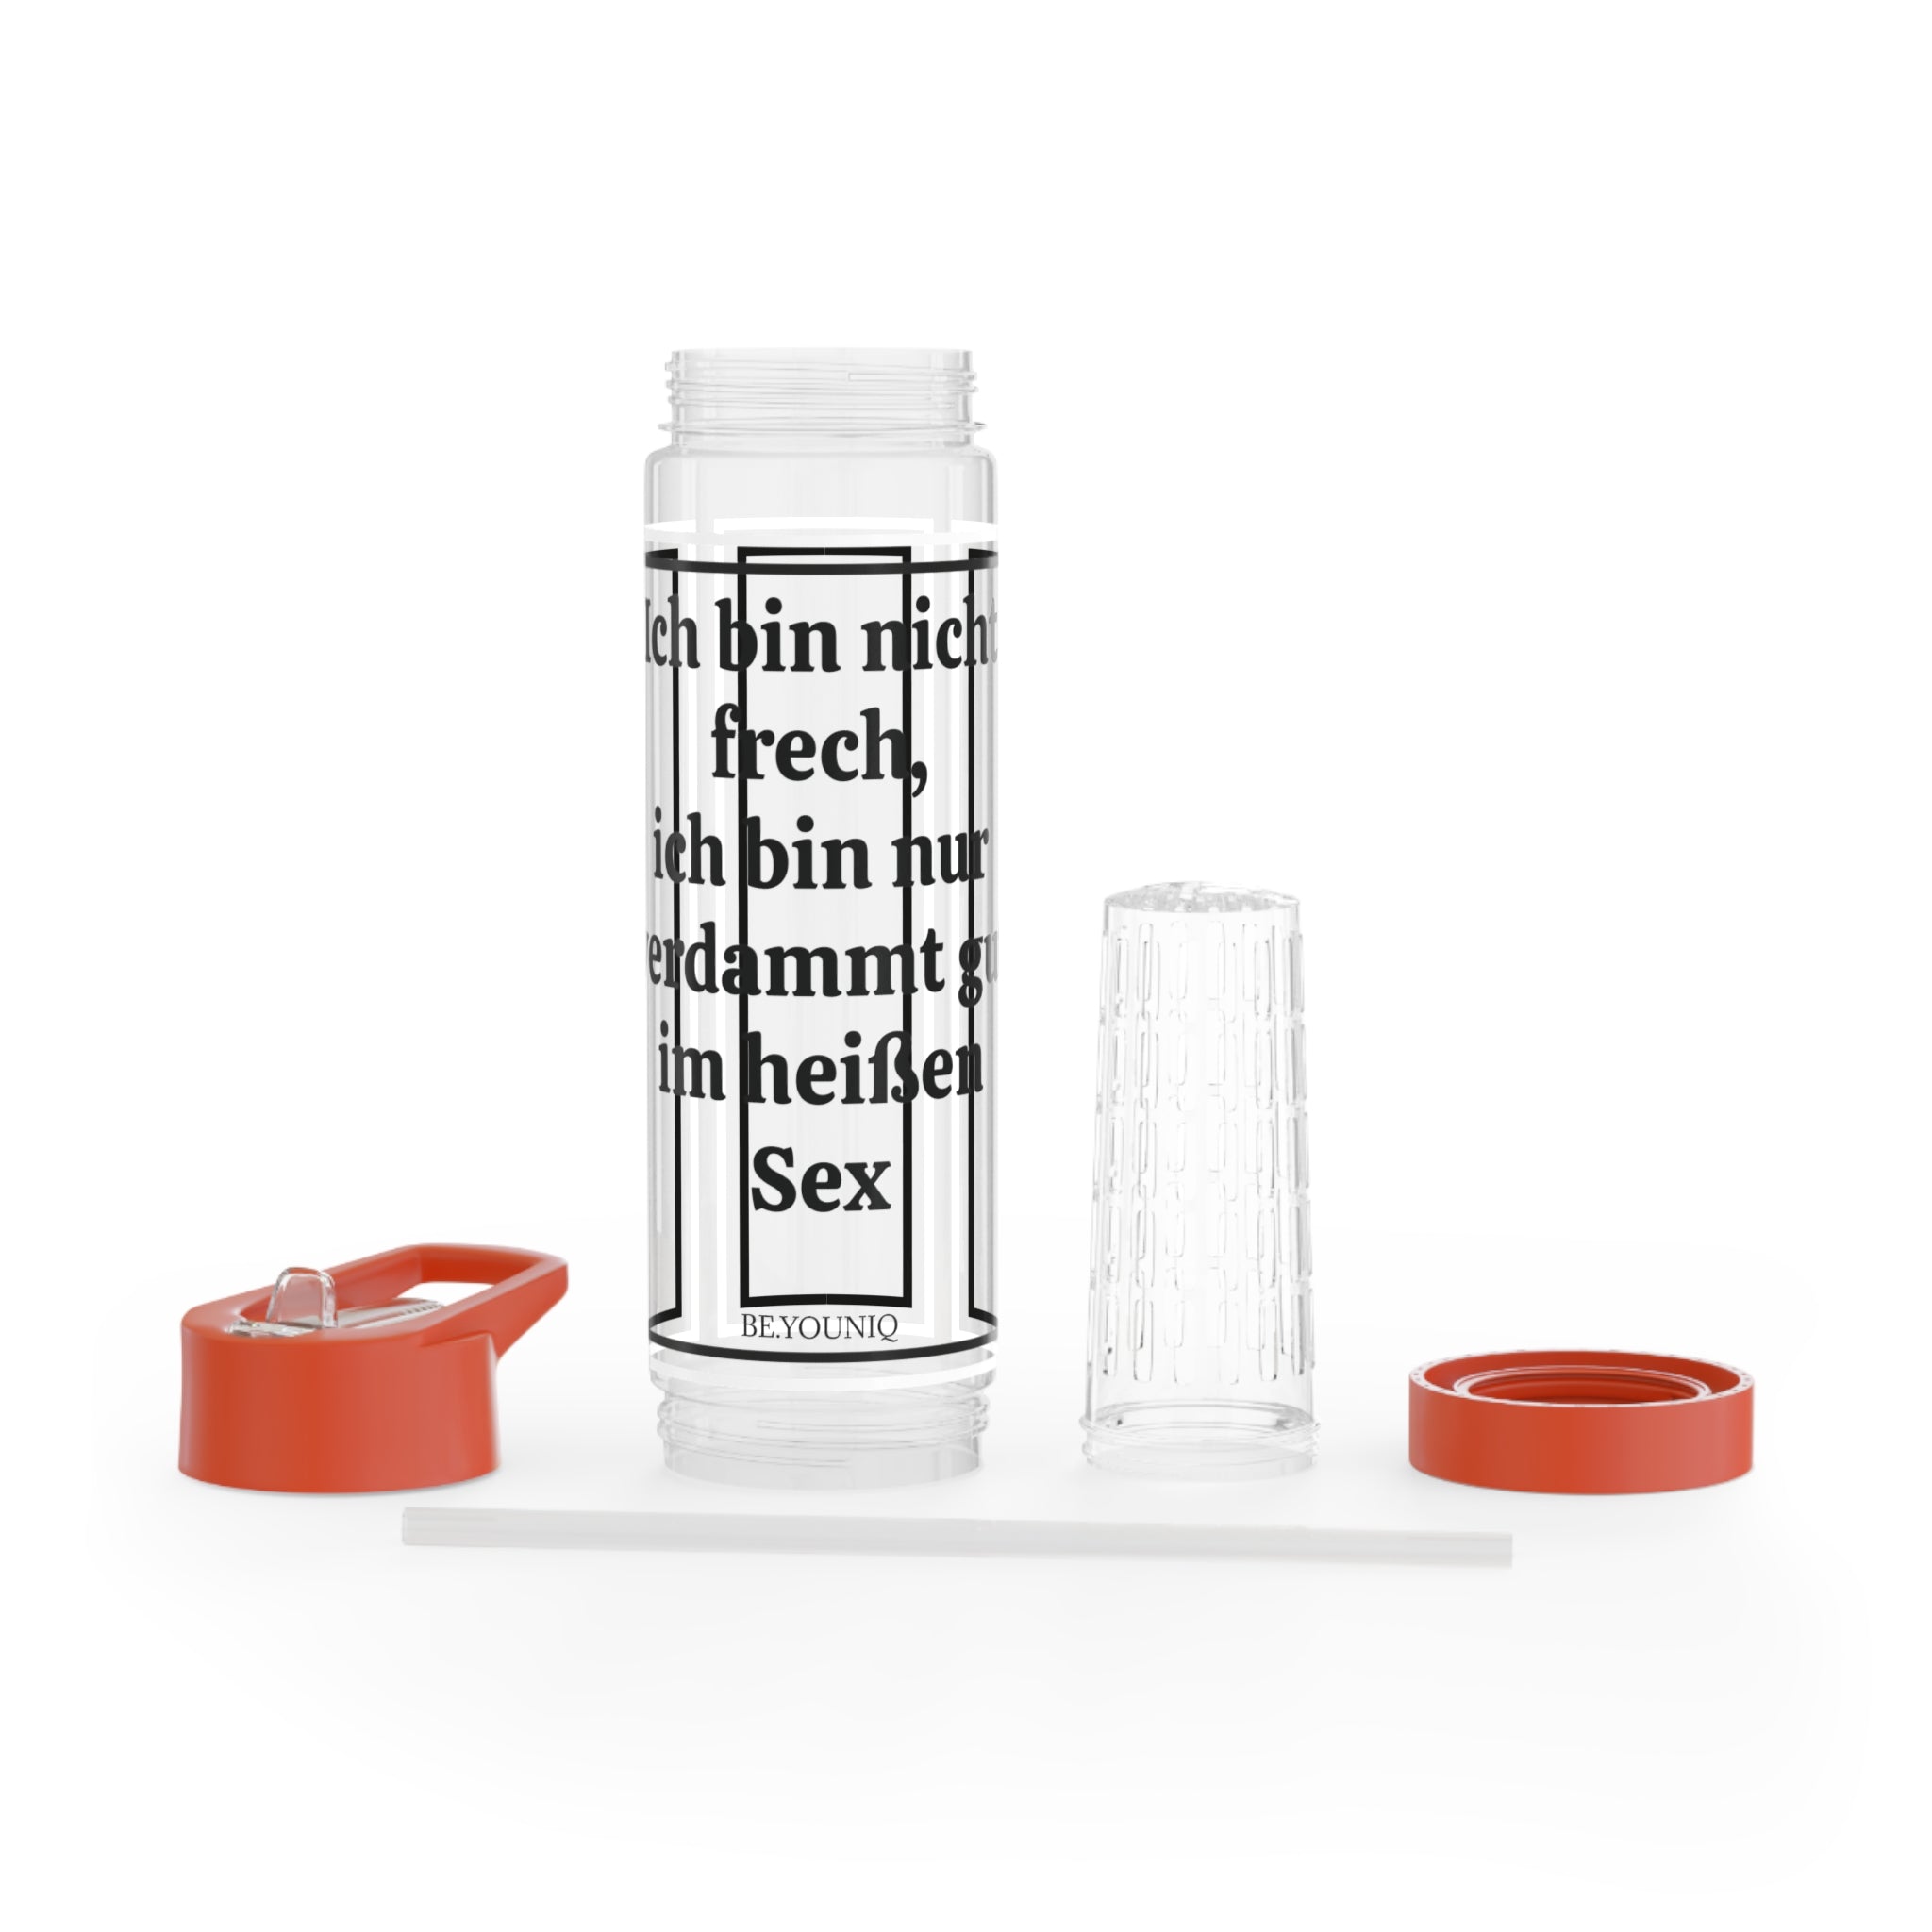 AquaBoost Infuser Water Bottle | I'm not naughty, I'm just damn good at hot sex